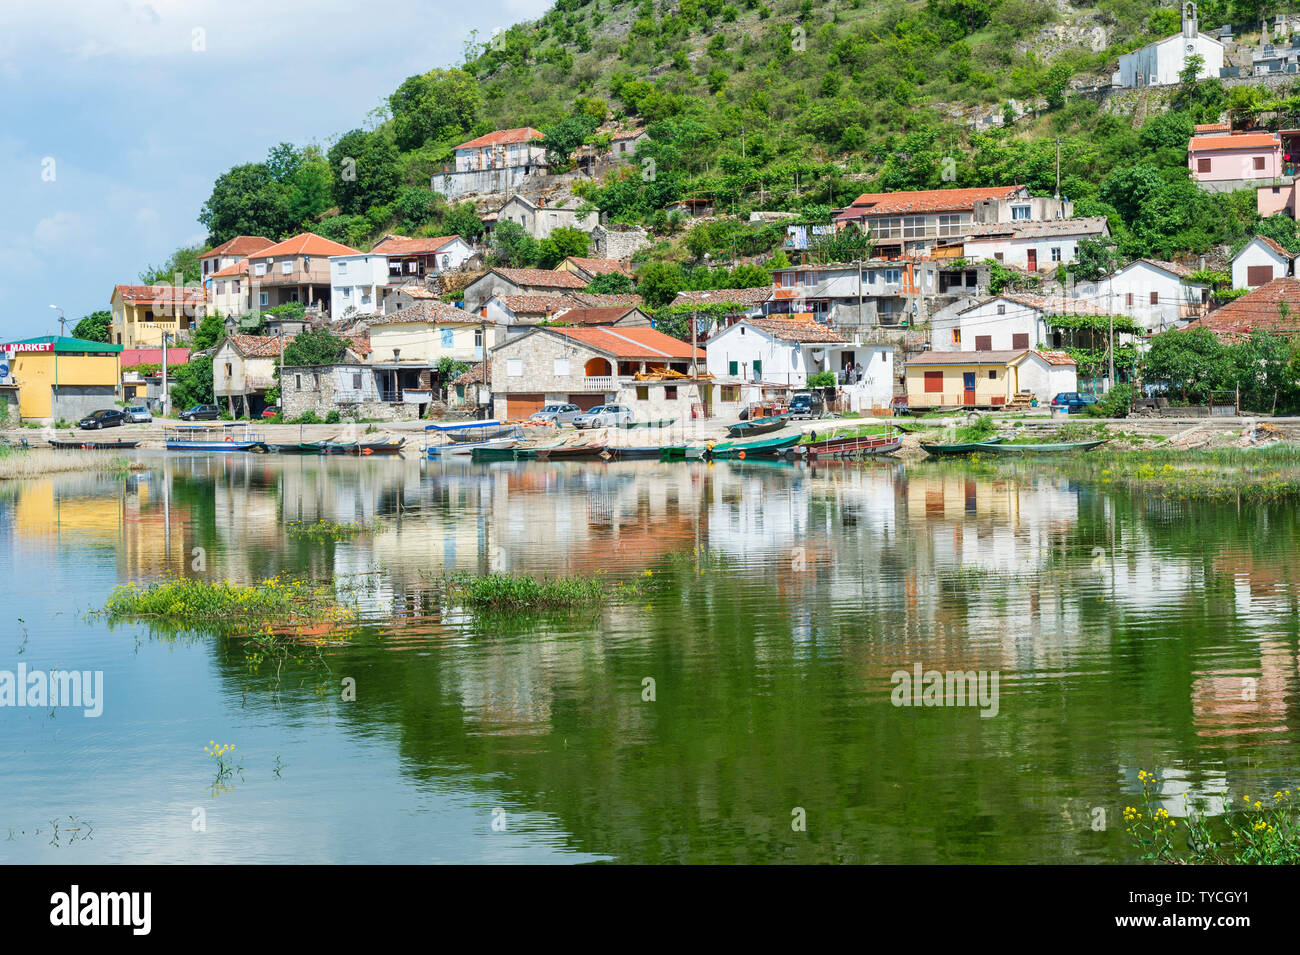 Small village reflecting in the water, near Albanian border, Montenegro Stock Photo